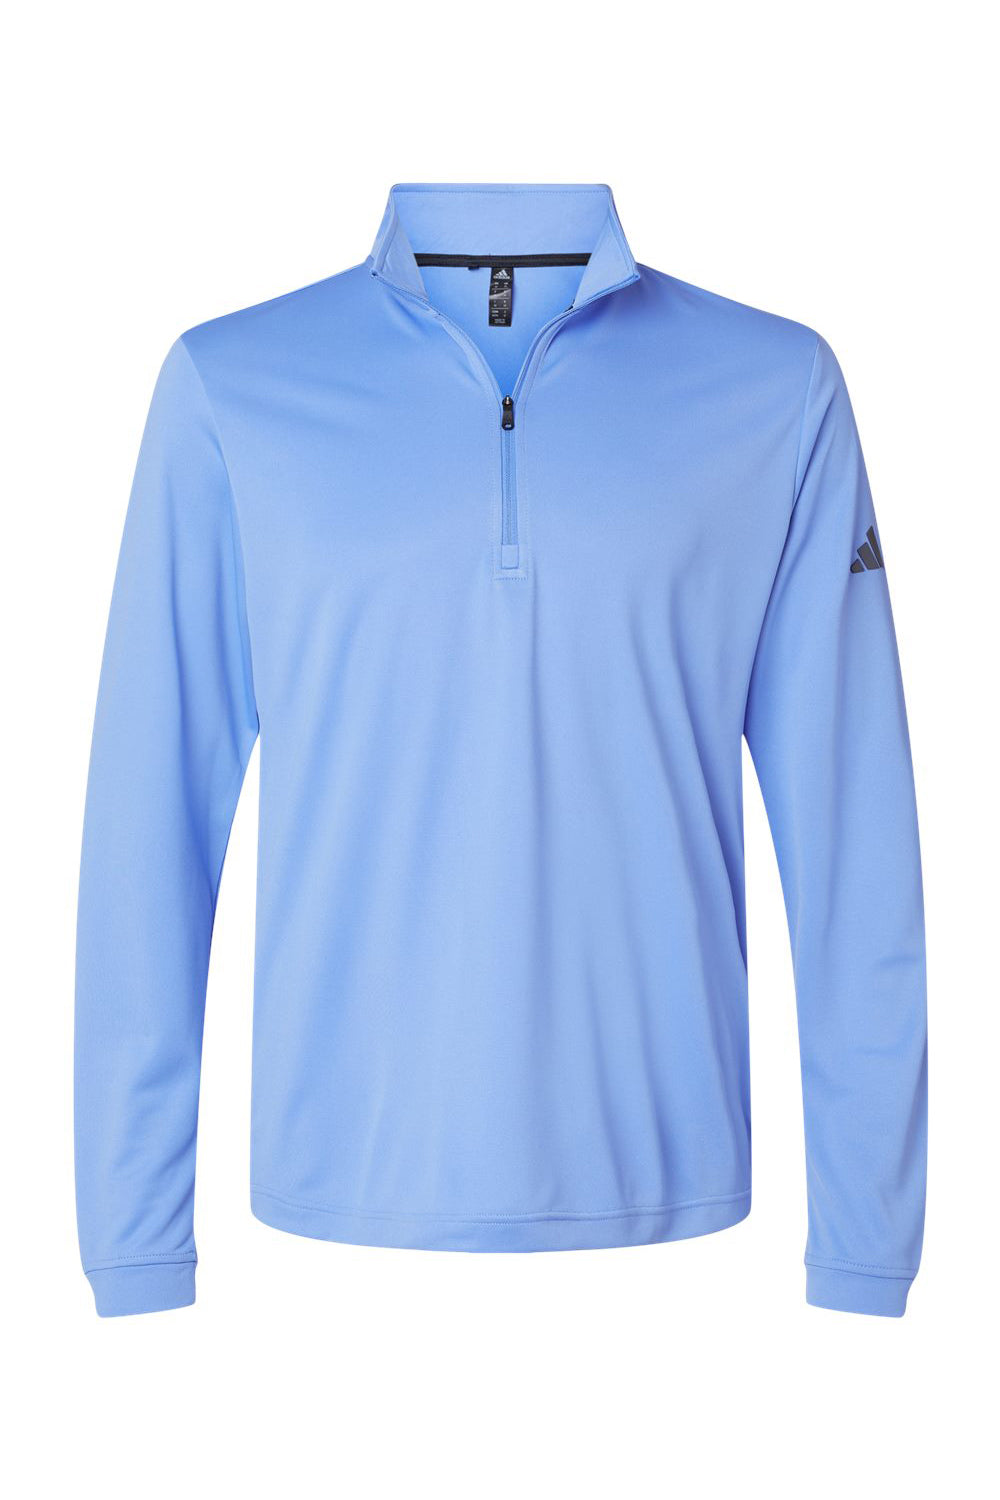 Adidas A401 Mens 1/4 Zip Pullover Blue Fusion Flat Front